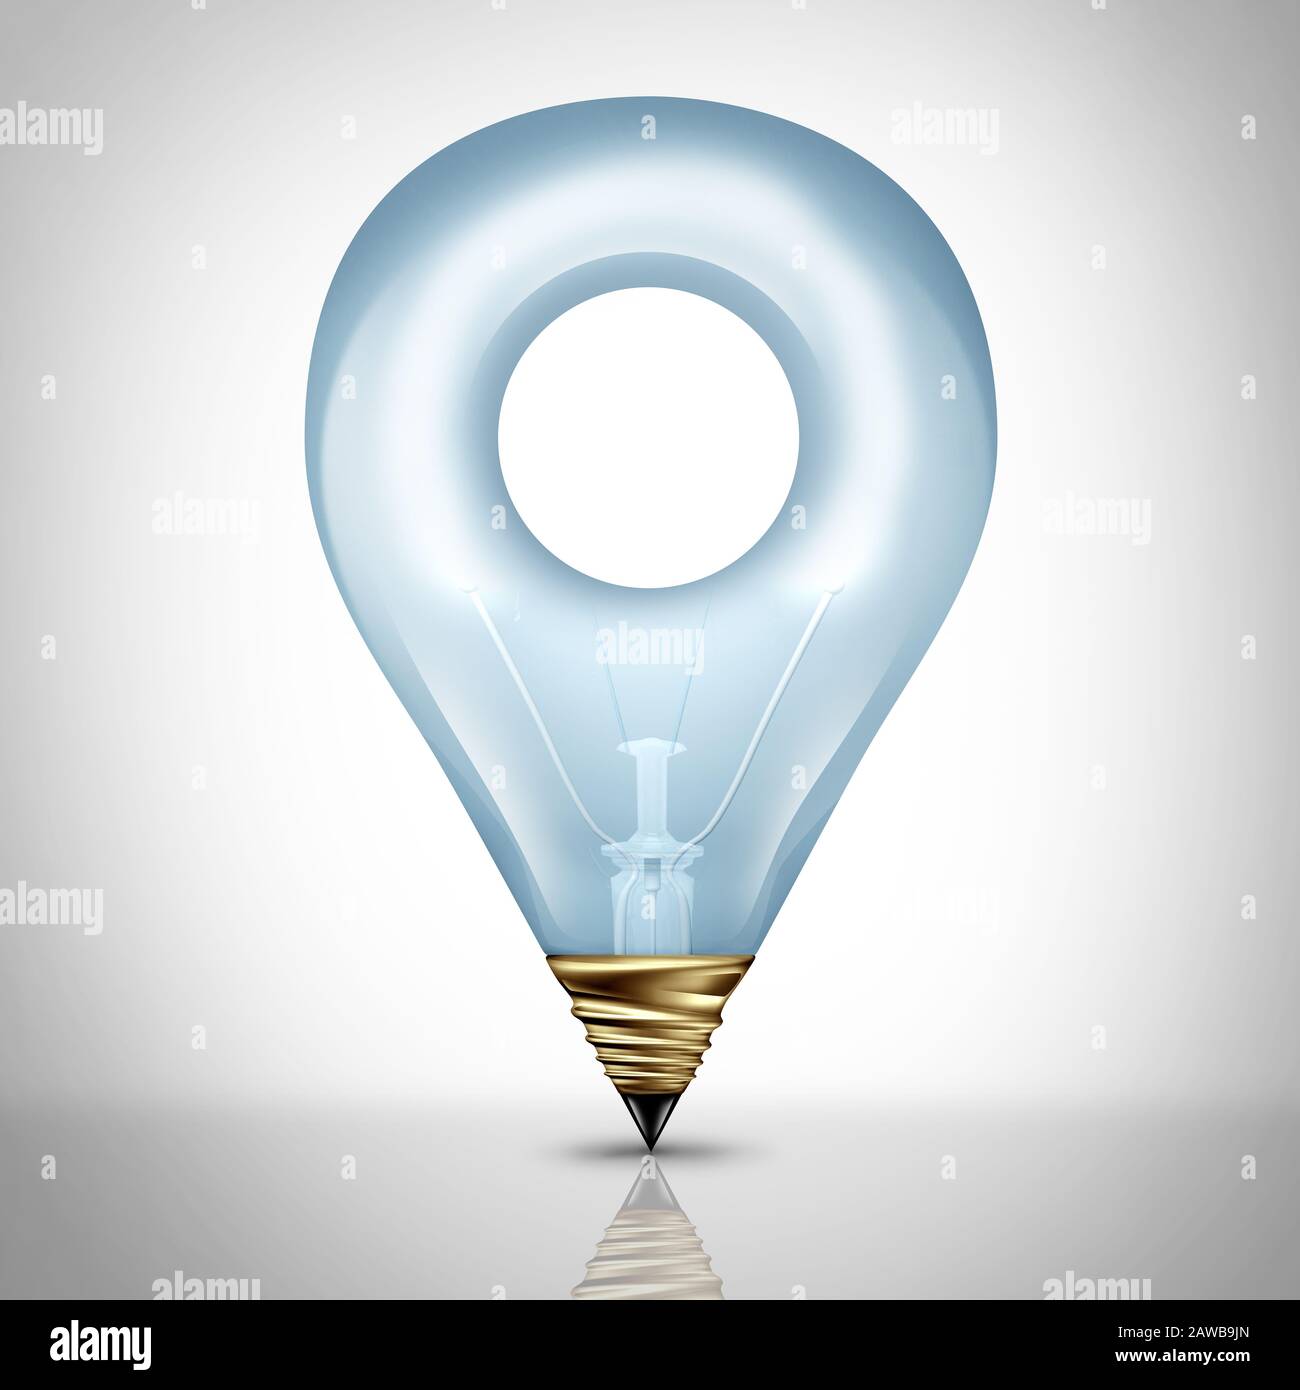 Idea location concept as a business success symbol as a lightbulb or light bulb shaped as a pin marker icon. Stock Photo